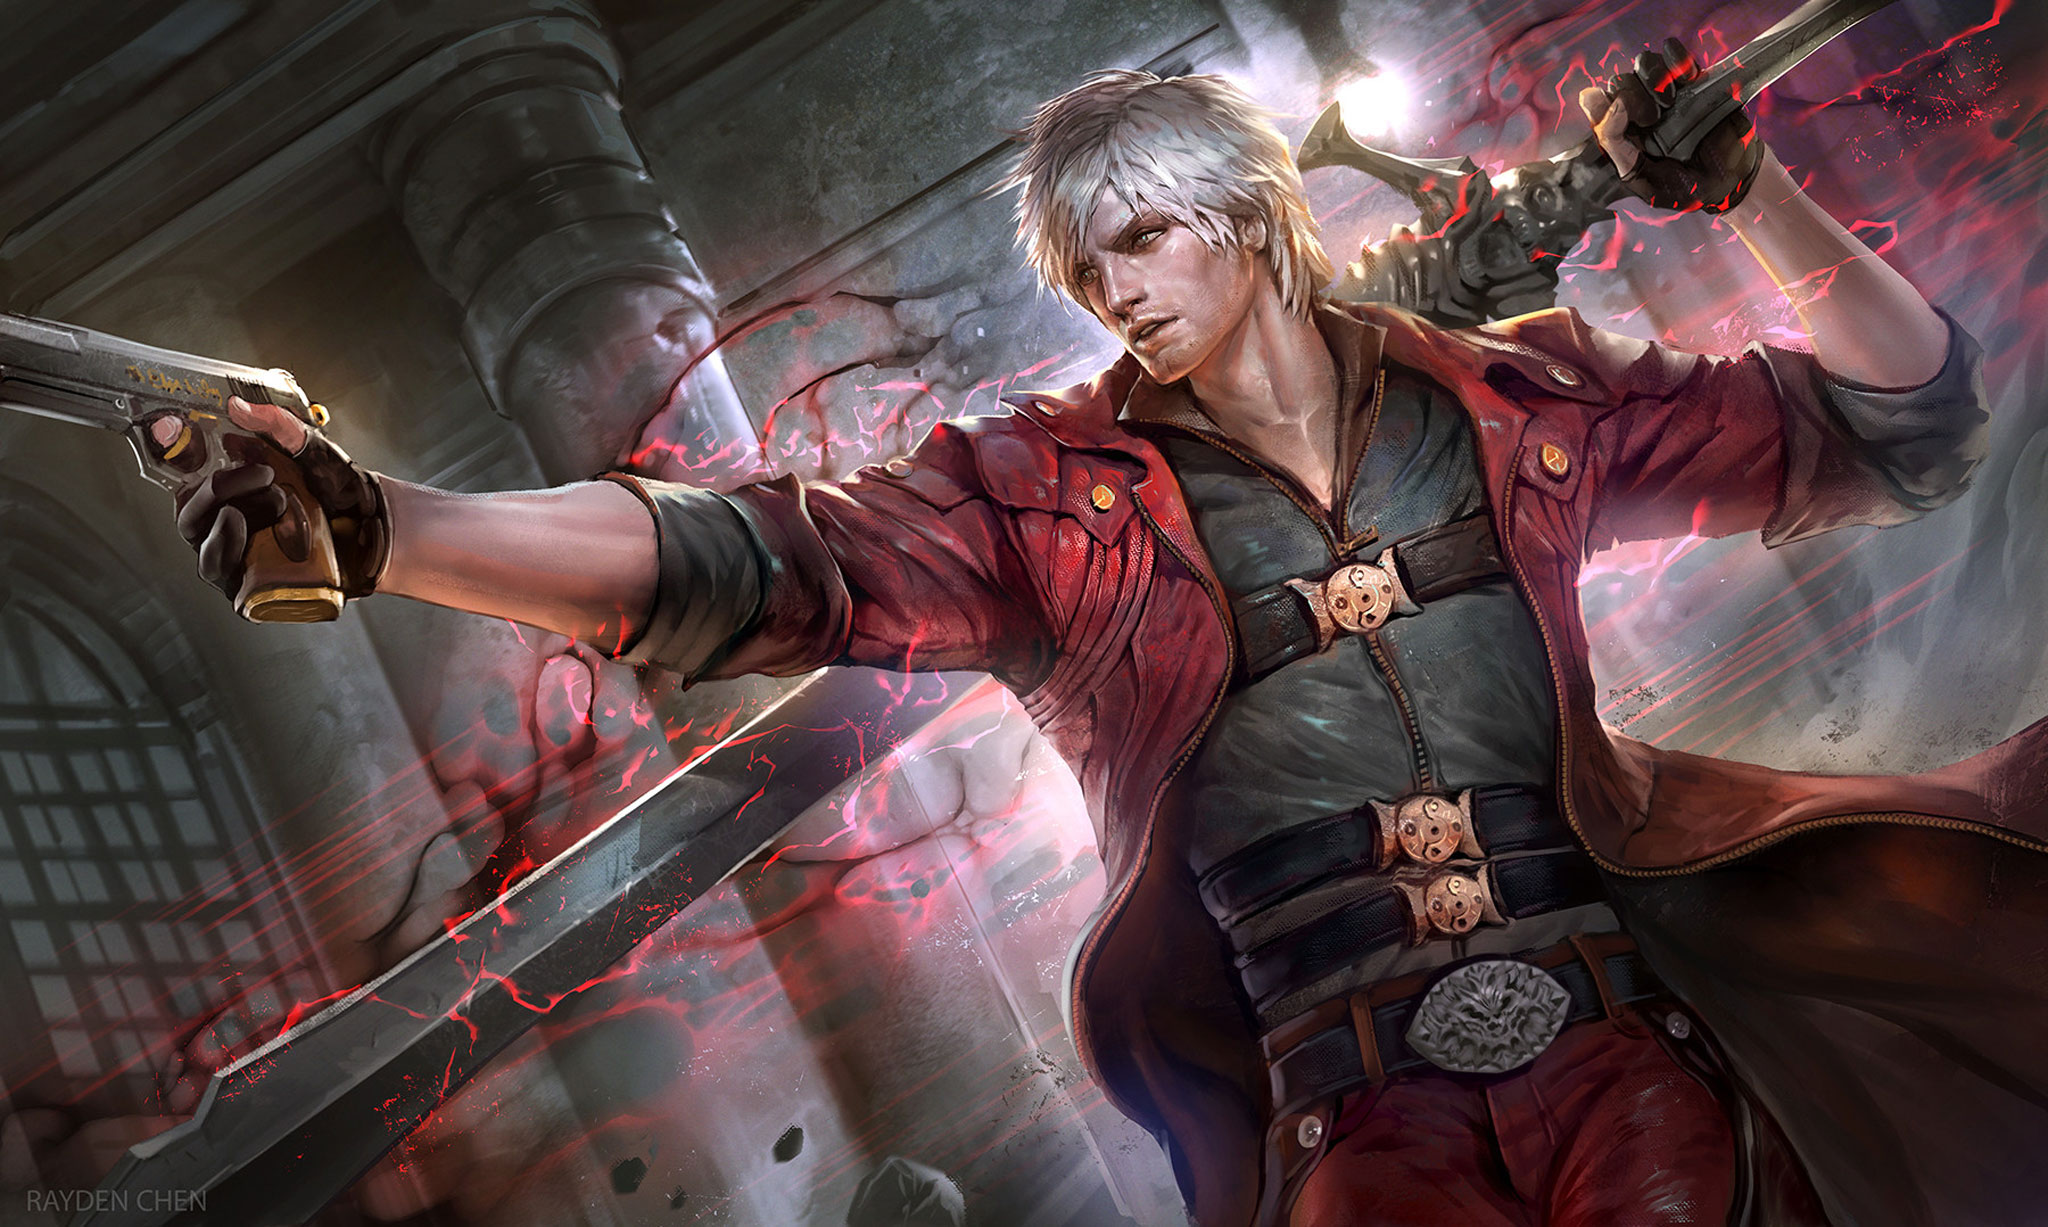 Games devil may cry. Данте DMC. Dante Devil May Cry. Devil my Cry 4 Данте. Данте Devil May Cry 5.